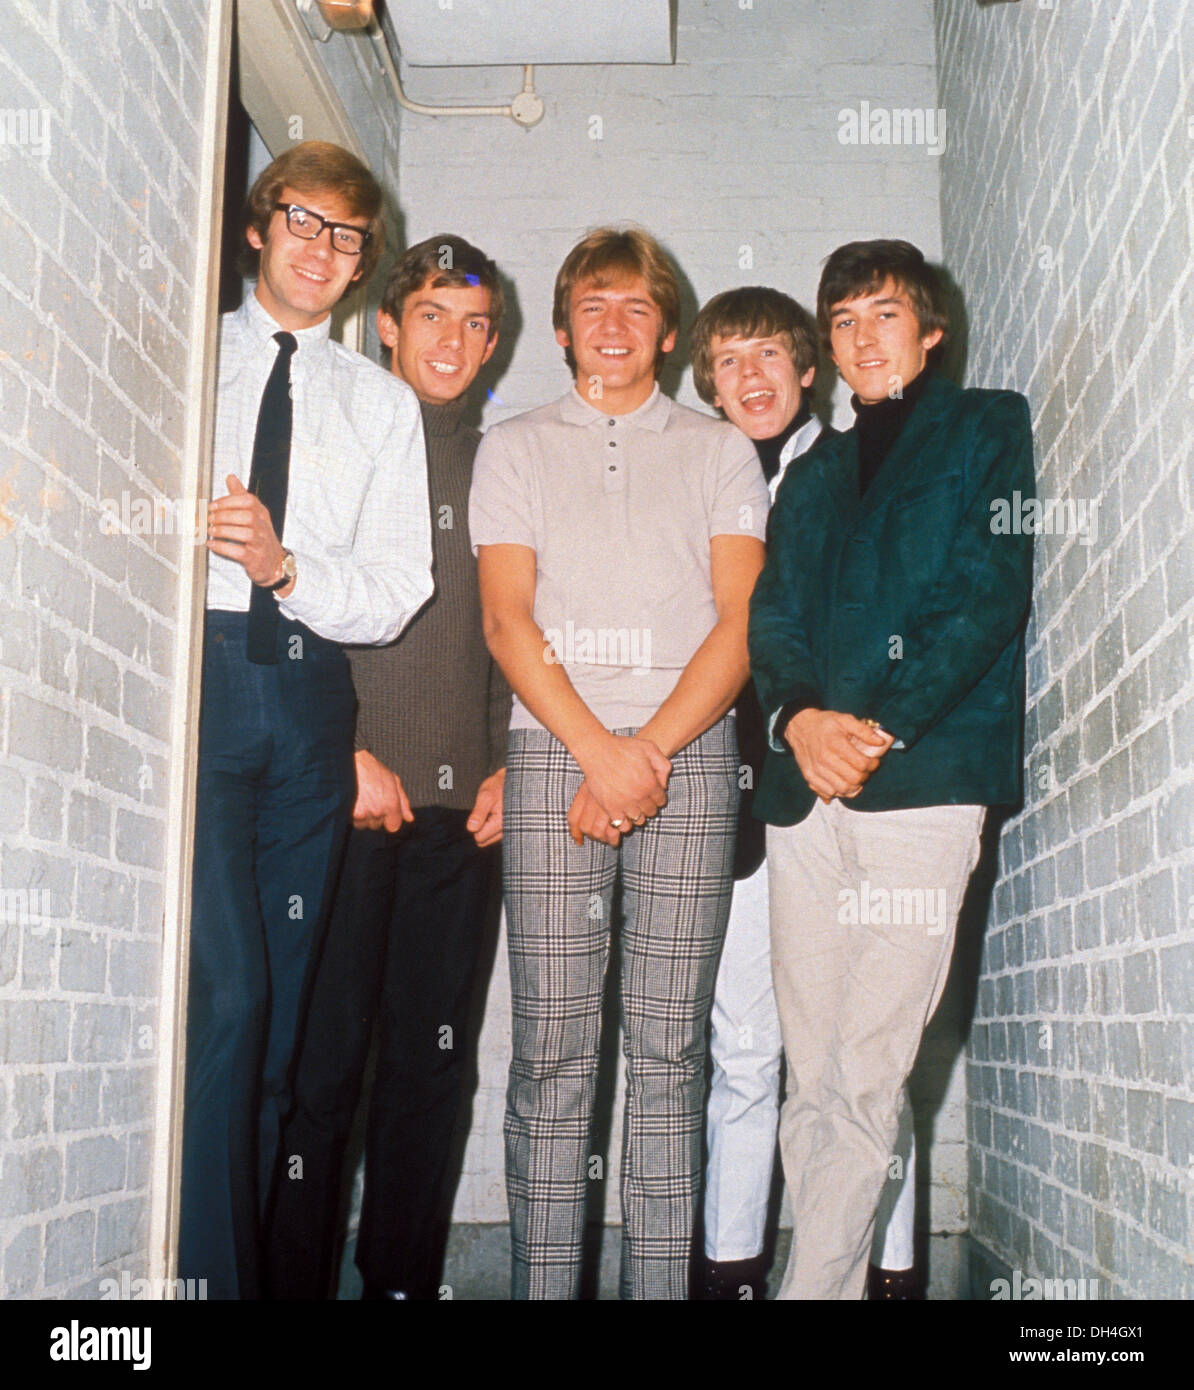 HERMAN'S HERMITS UK pop group about 1968. From left: Derek Leckenby, Barry Whitwam, Karl Green, Peter Noone, Keith Hopwood Stock Photo